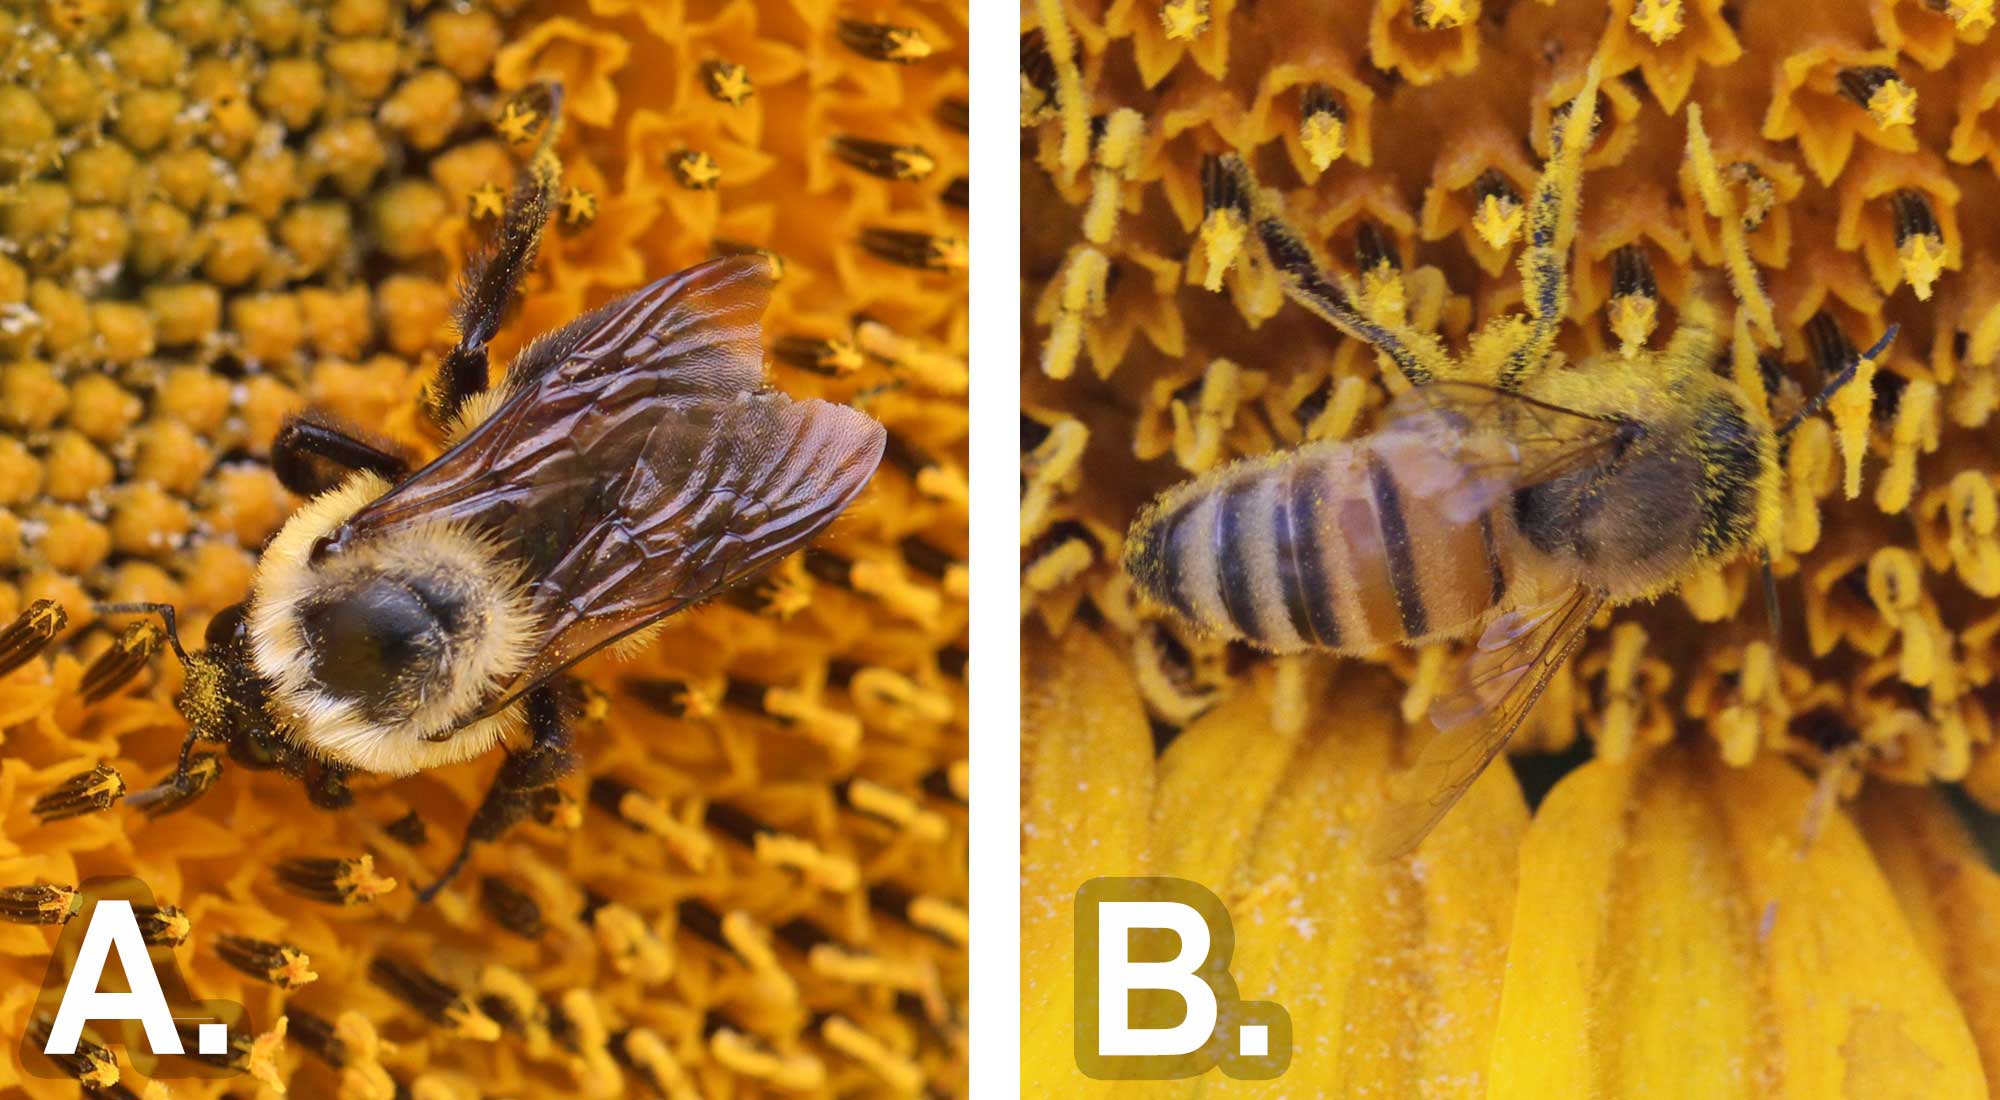 Left: Black and yellow bee on yellow flower. Right: Black and yellow bee on yellow flower.